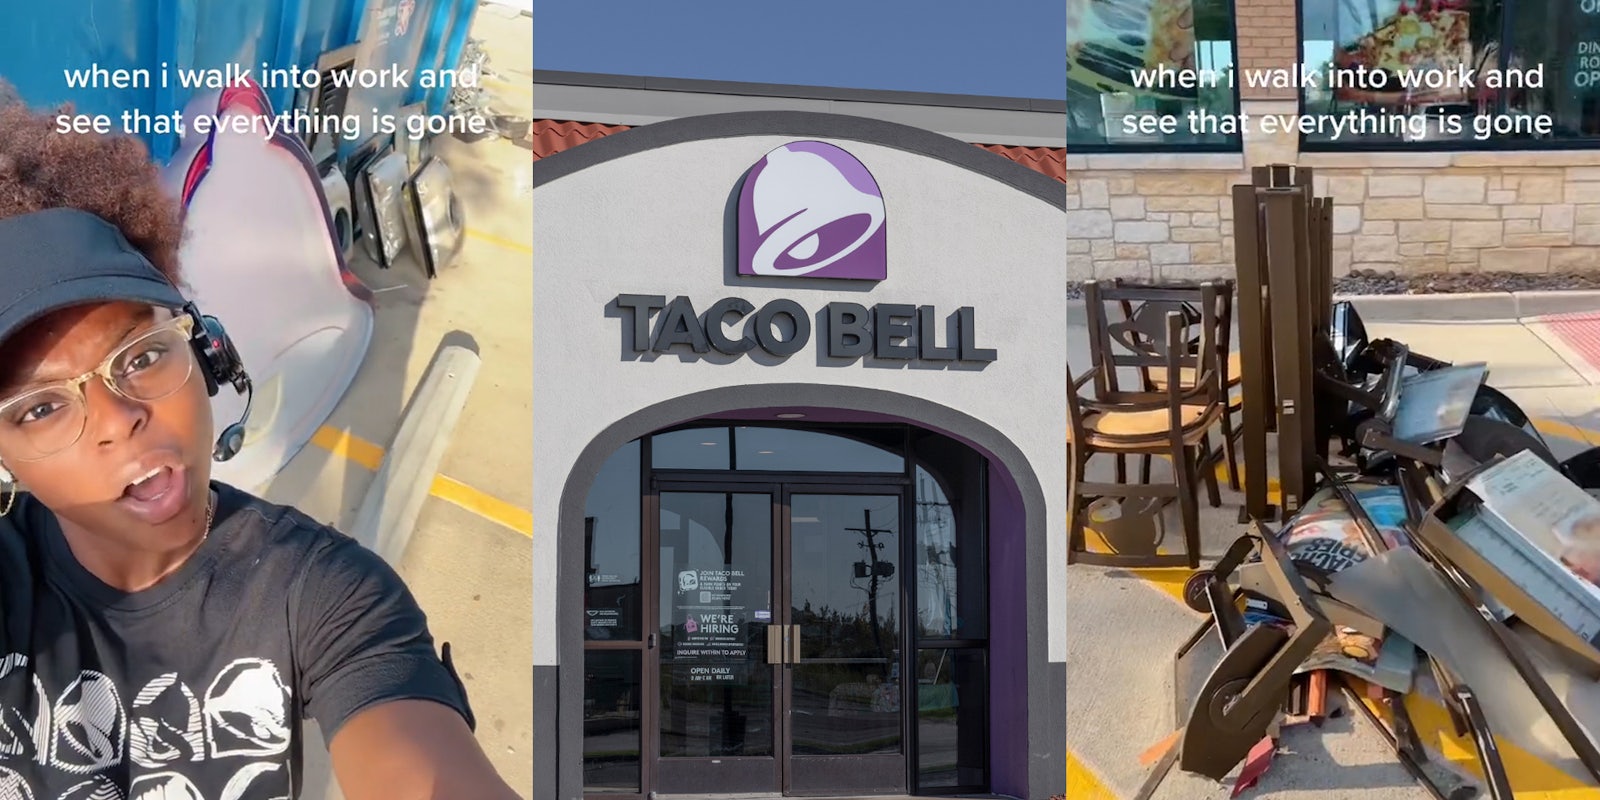 Taco Bell worker outside with caption 'when i walk into work and see that everything is gone' (l) Taco Bell entrance with sign (c) Taco Bell interior decor in pile outside with caption with caption 'when i walk into work and see that everything is gone' (r)